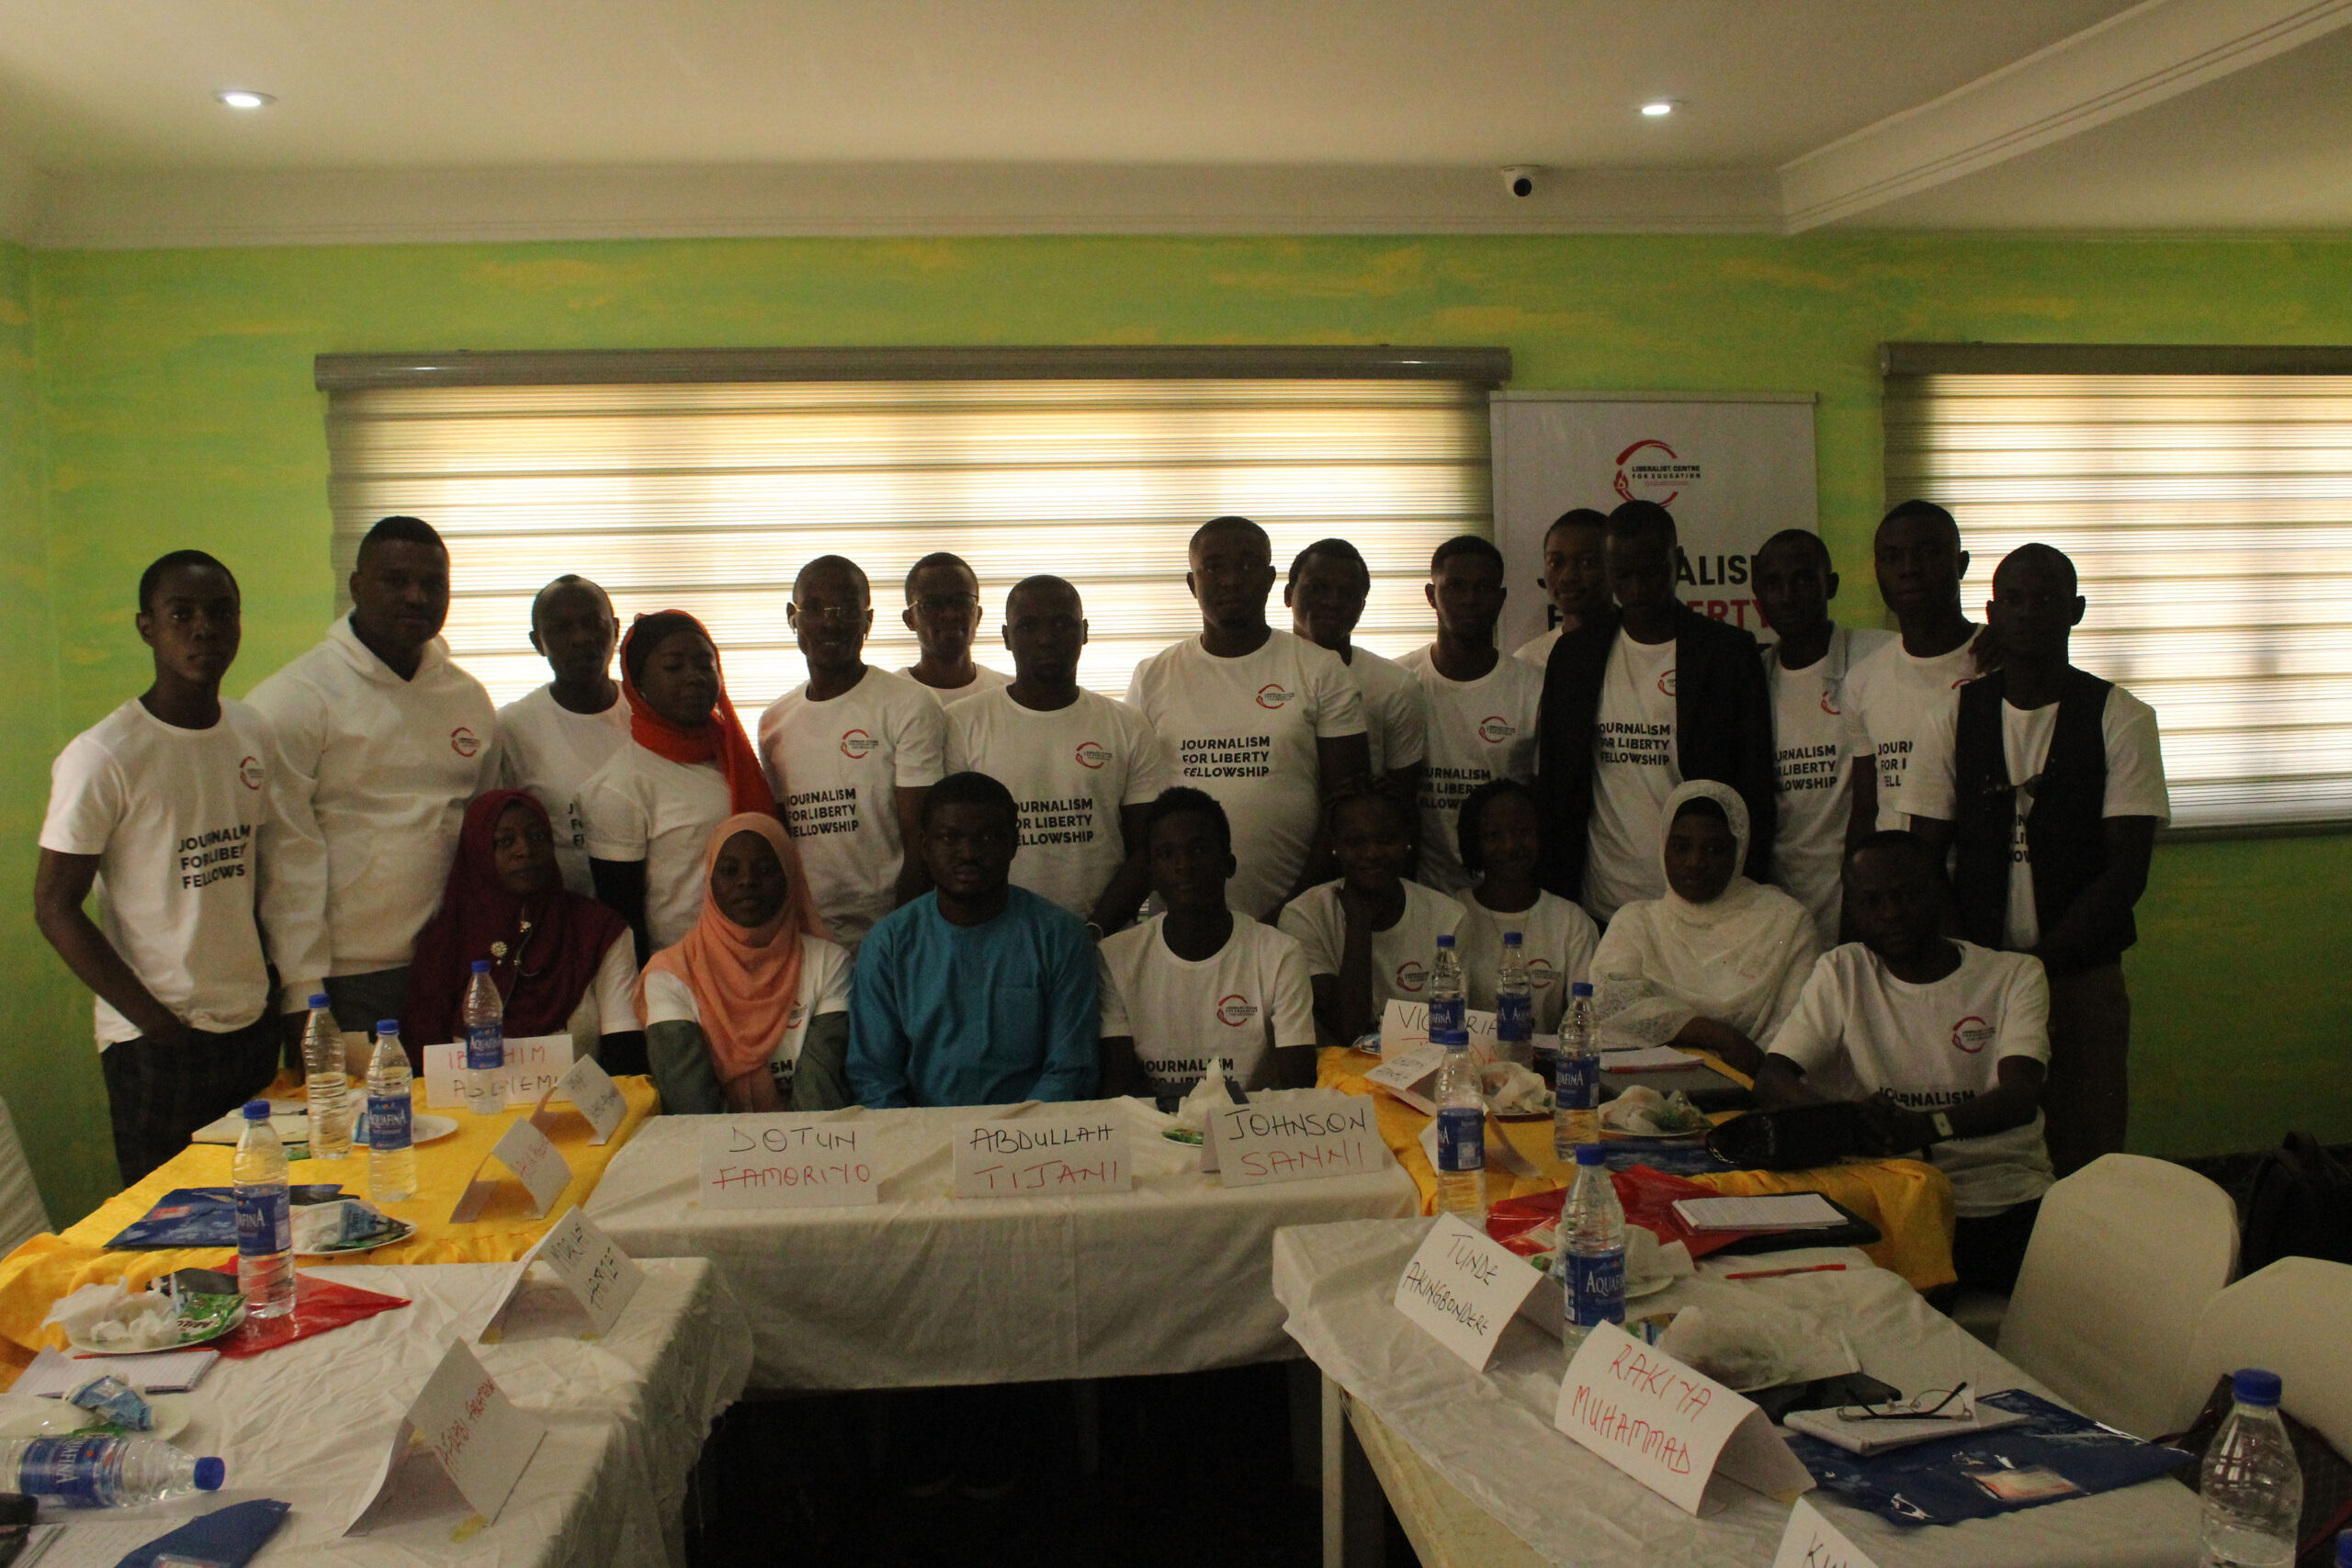 Nigeria-based Think Tank, Liberalist Centre, Trains Journalists on Pro-freedom Reporting, Launches News Magazine